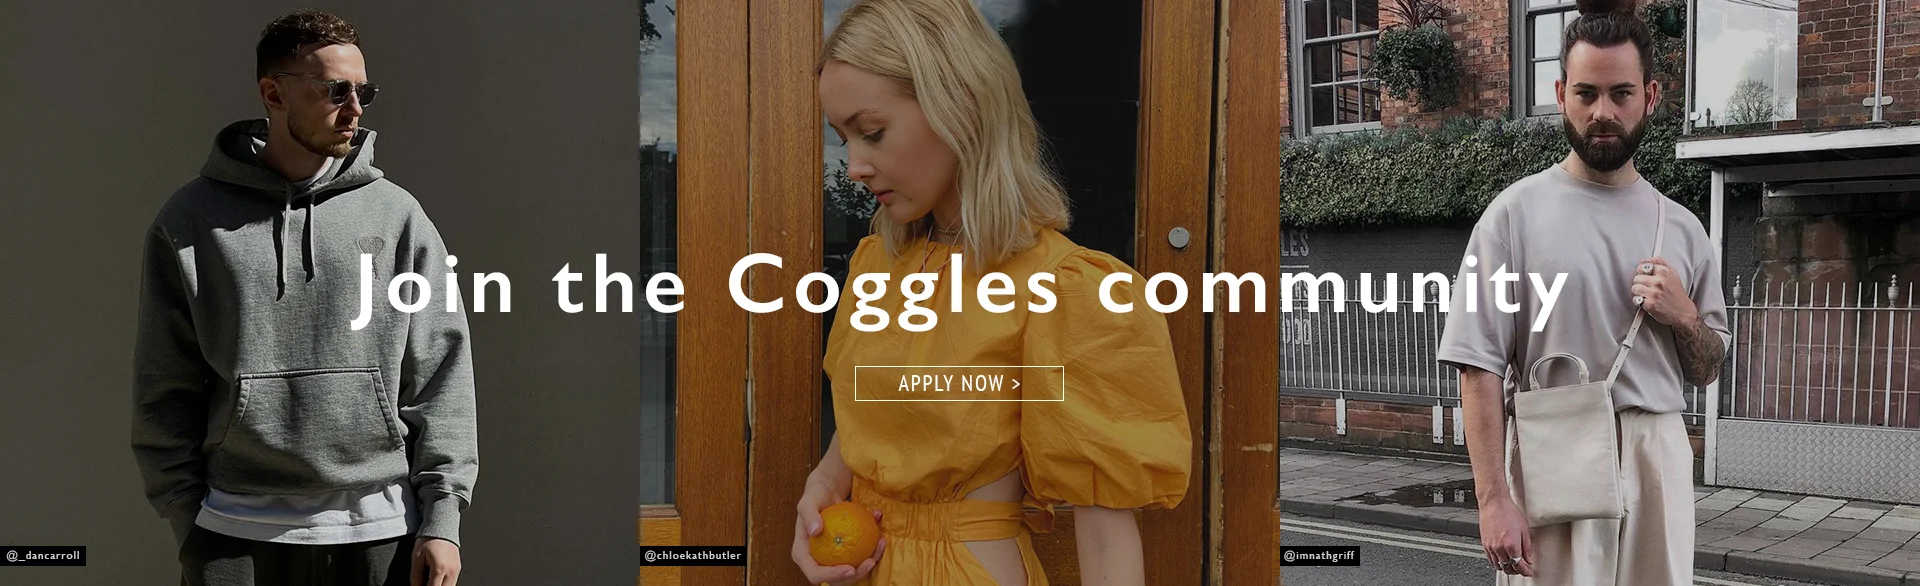 Join the Coggles community